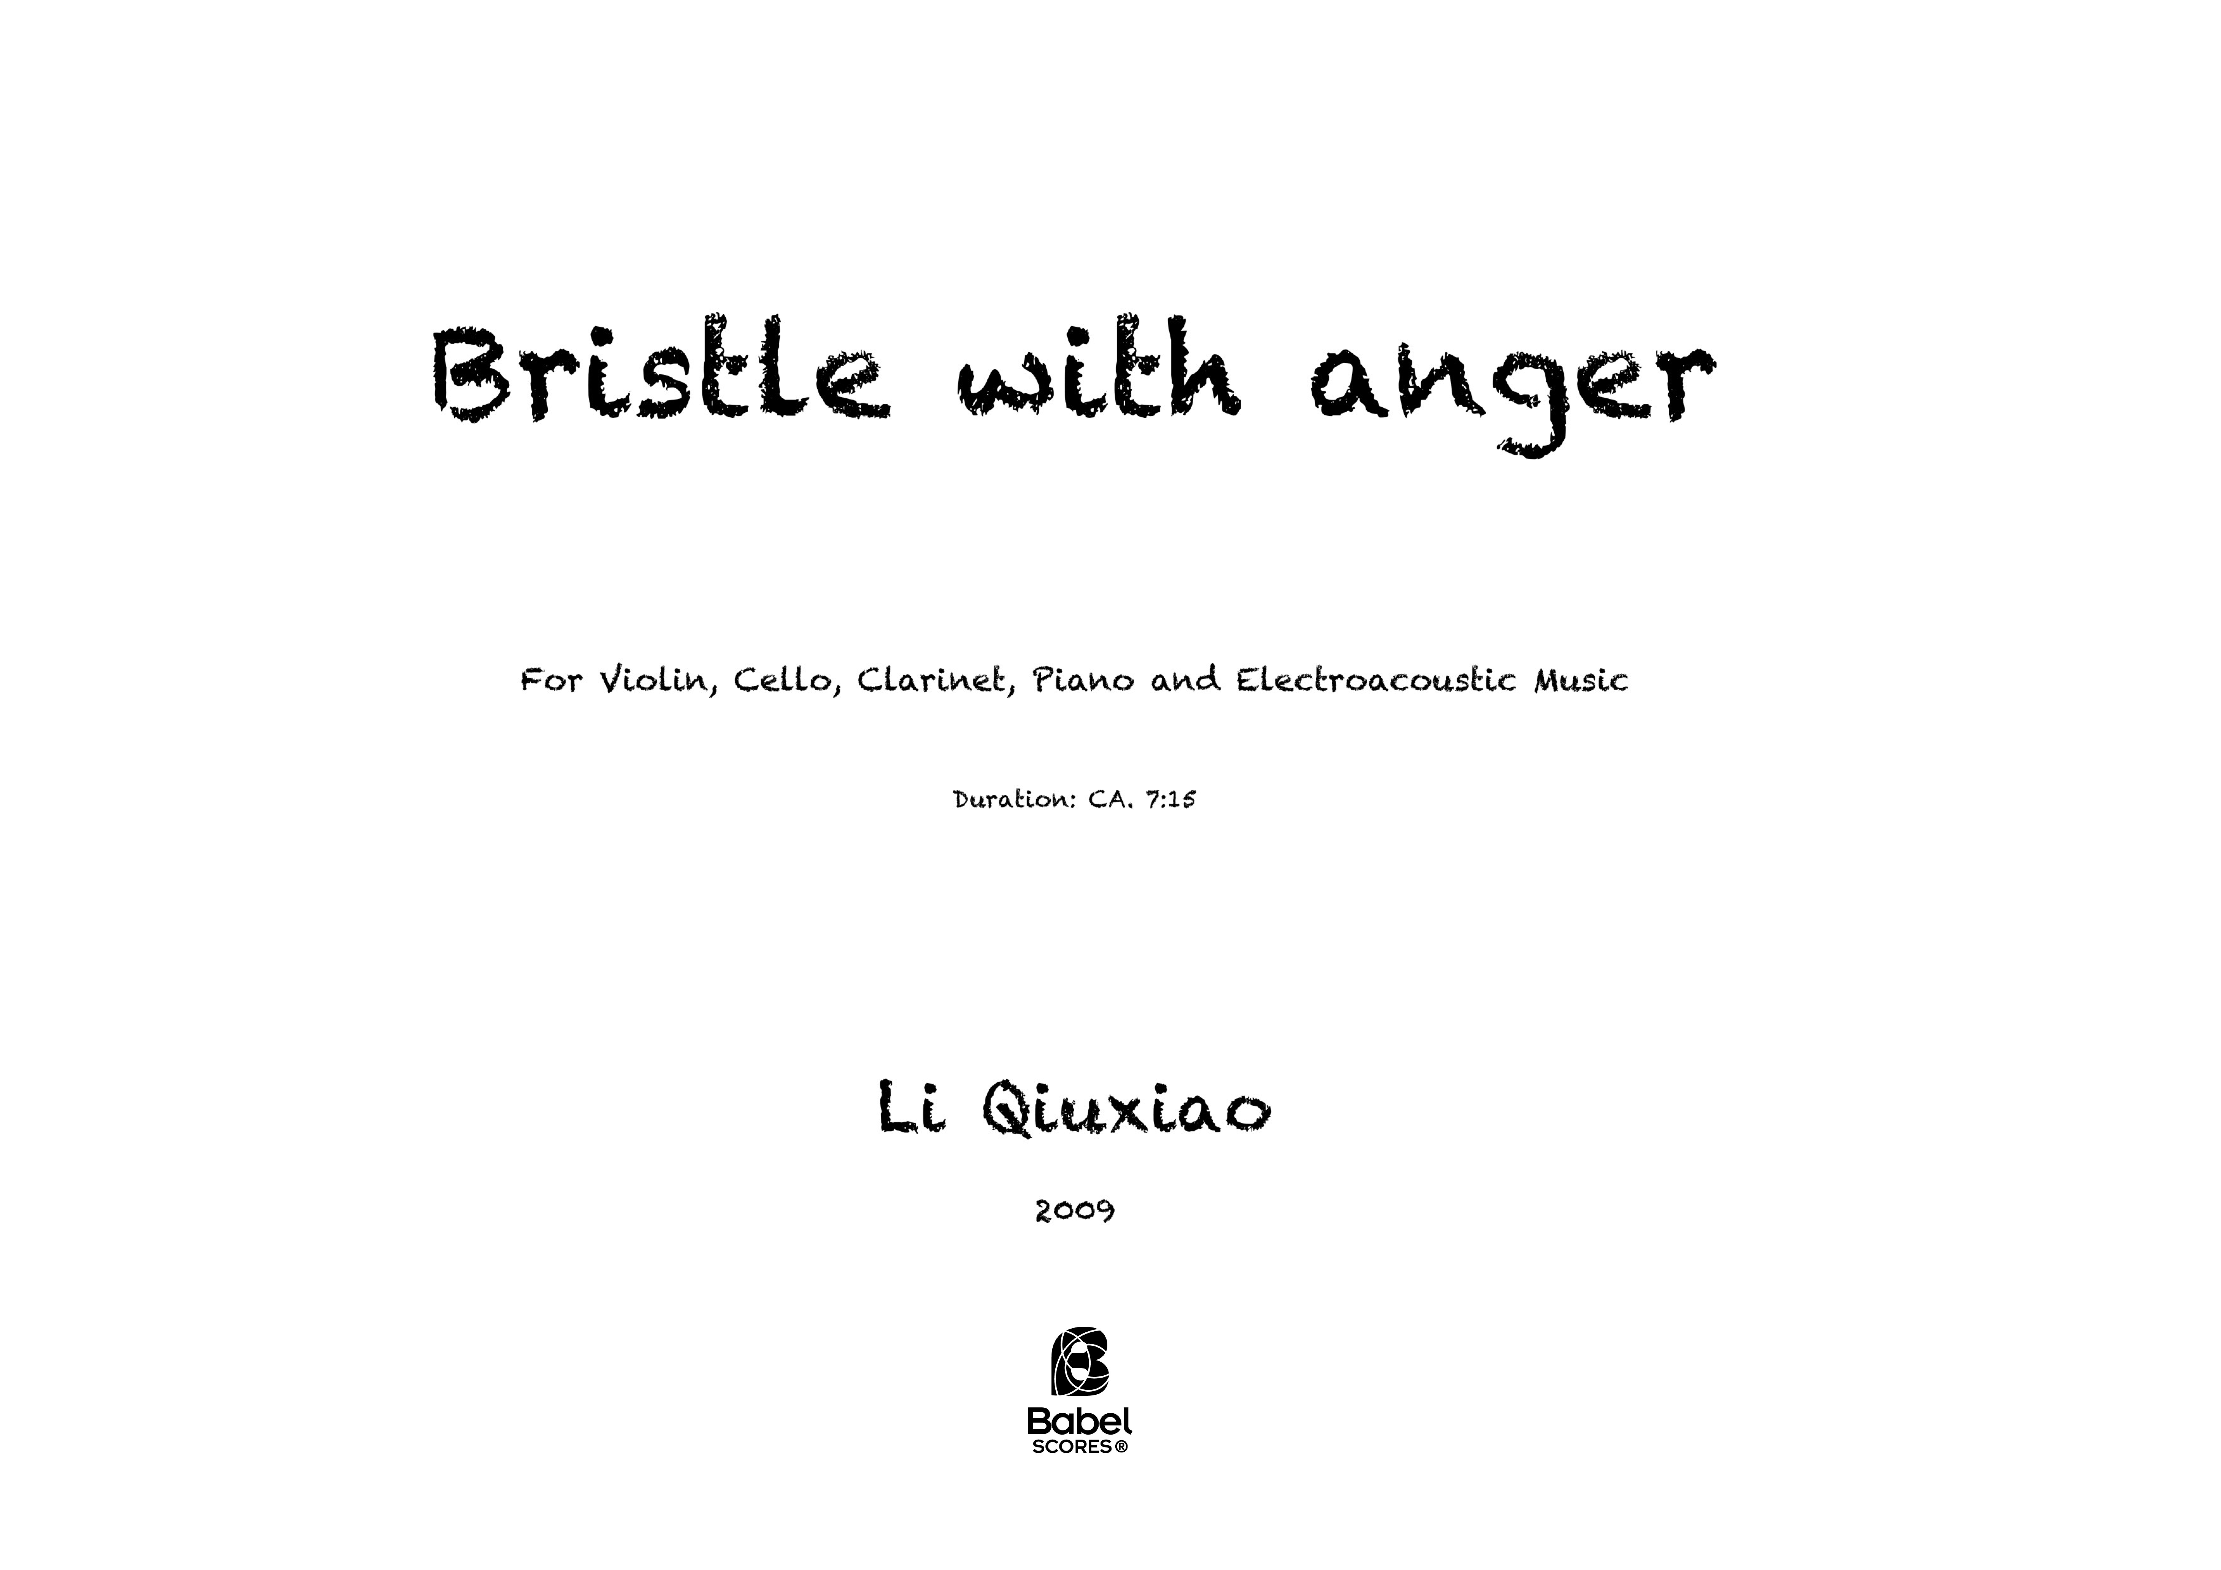 Bristle with anger A4 z